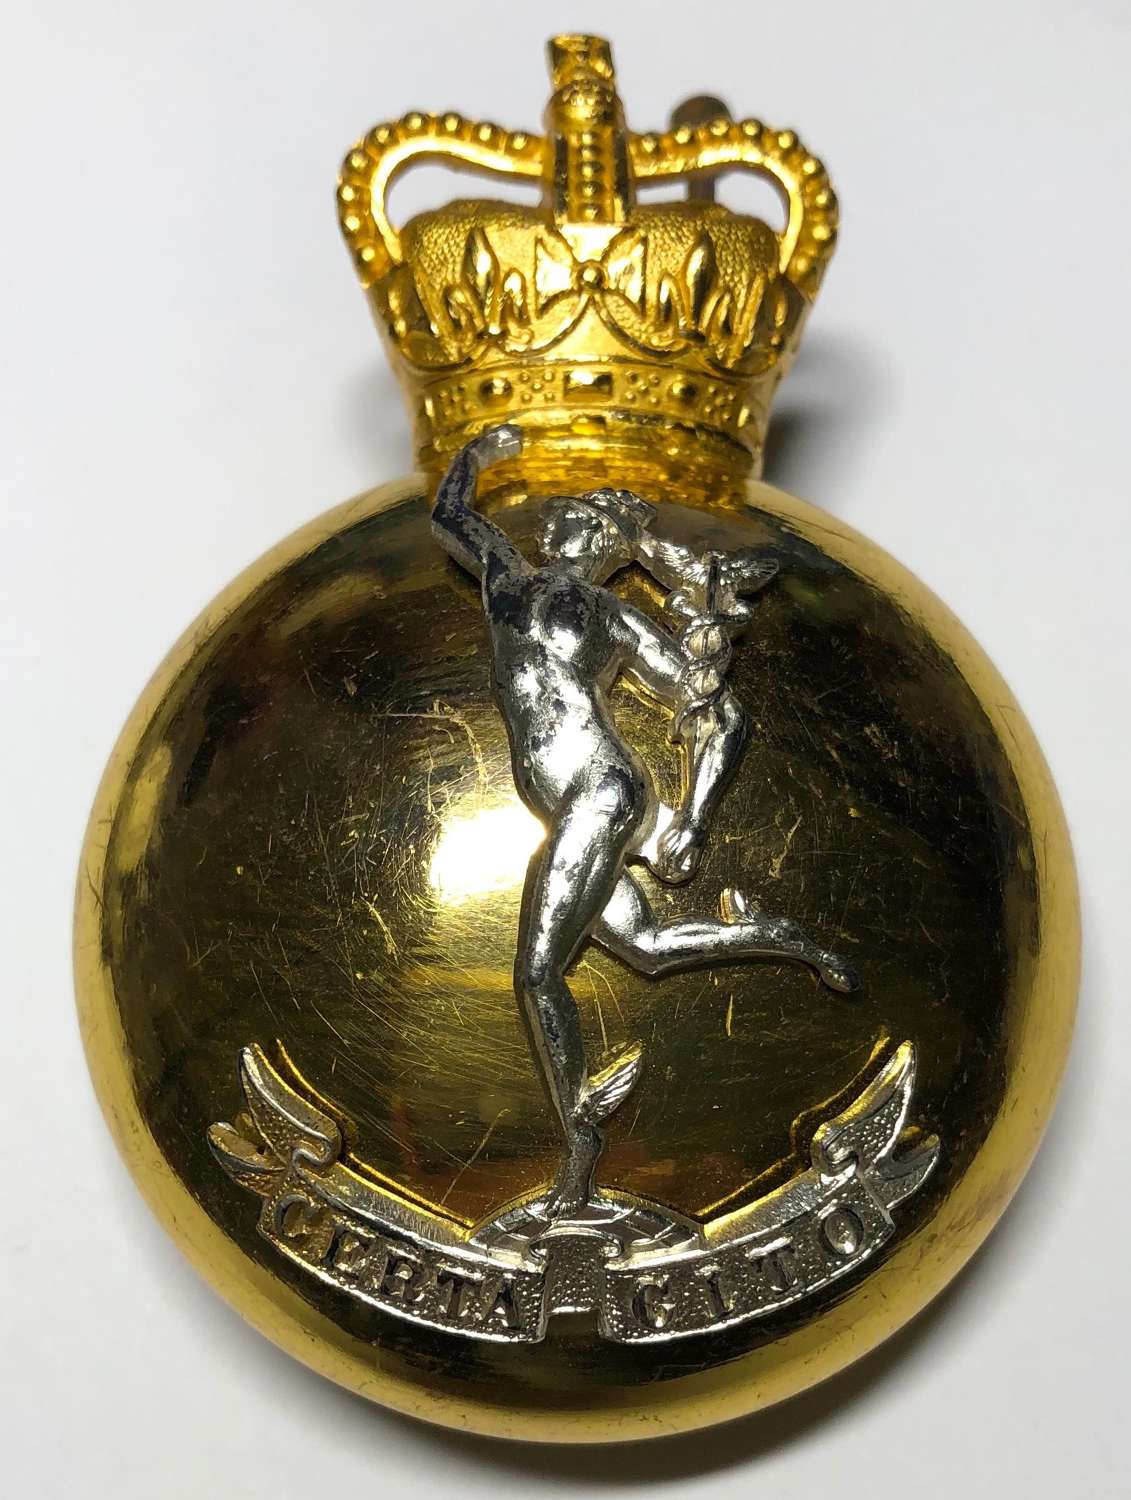 Royal Corps of Signals bandsman’s busby plume holder